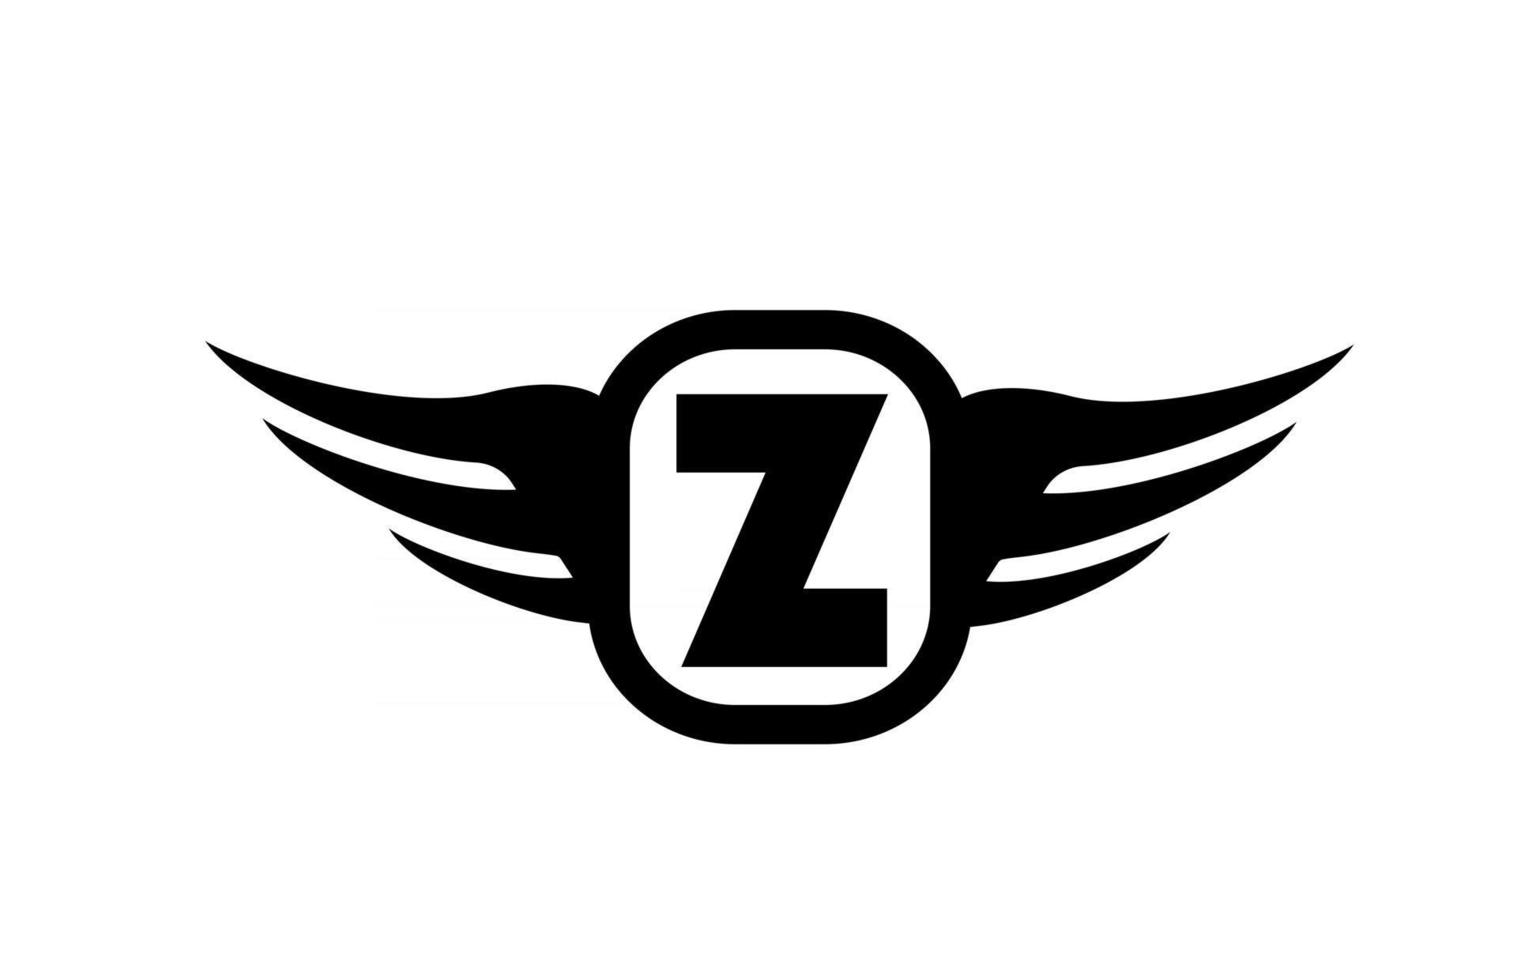 Z alphabet letter logo for business and company with wings and black and white color. Corporate brading and lettering icon with simple design vector